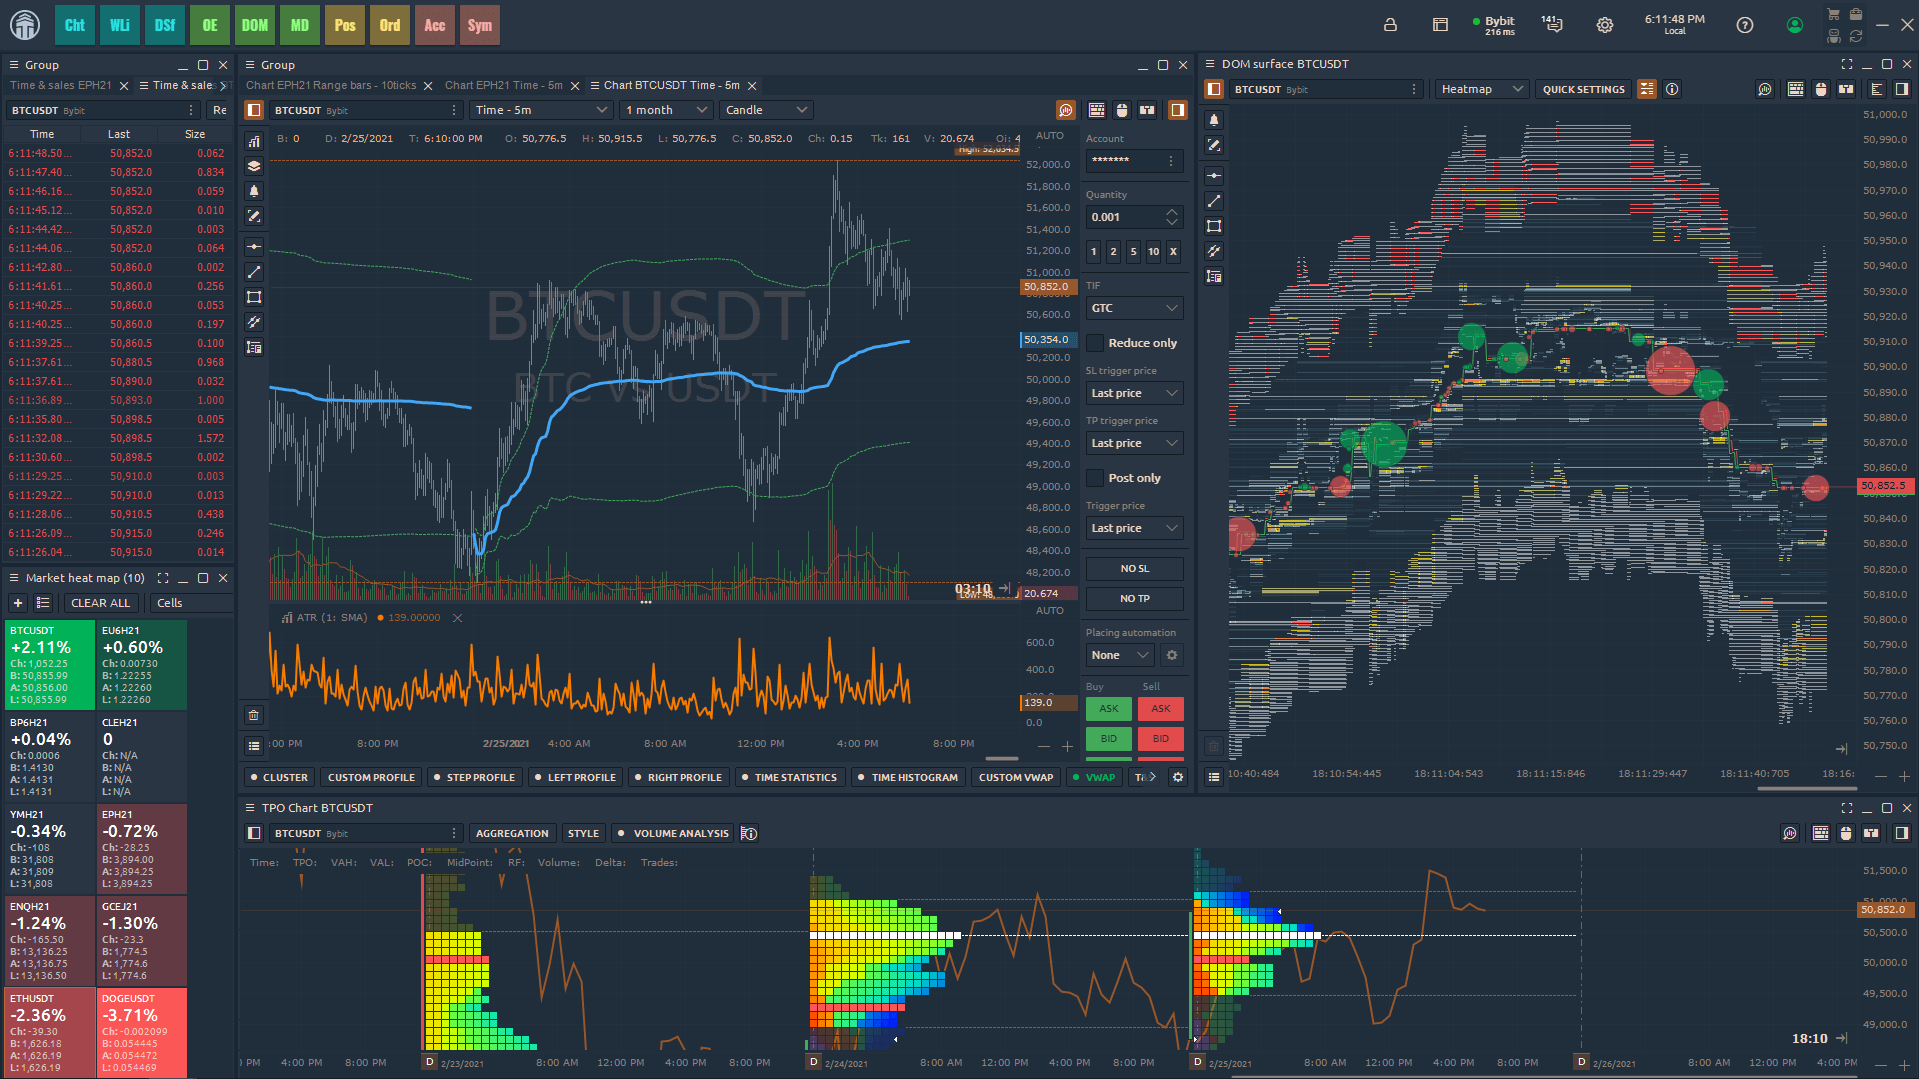 Use advanced trade analysis for Bybit in Quantower